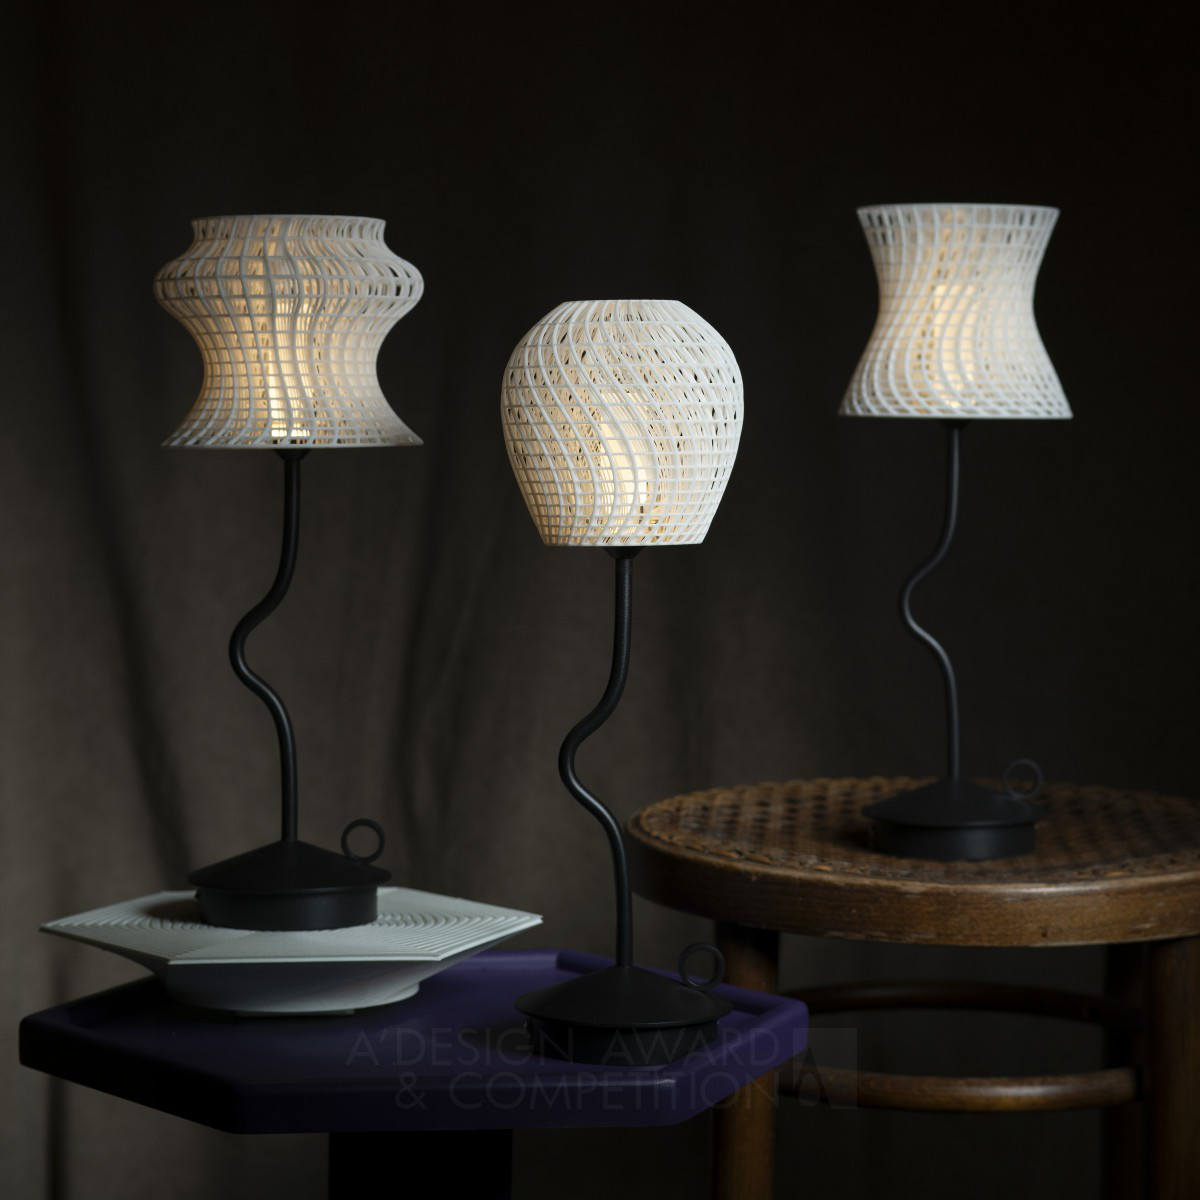 Jeffrey Geiringer wins Bronze at the prestigious A' 3D Printed Forms and Products Design Award with Quintessence Spectrum Series Portable Table Lamp.